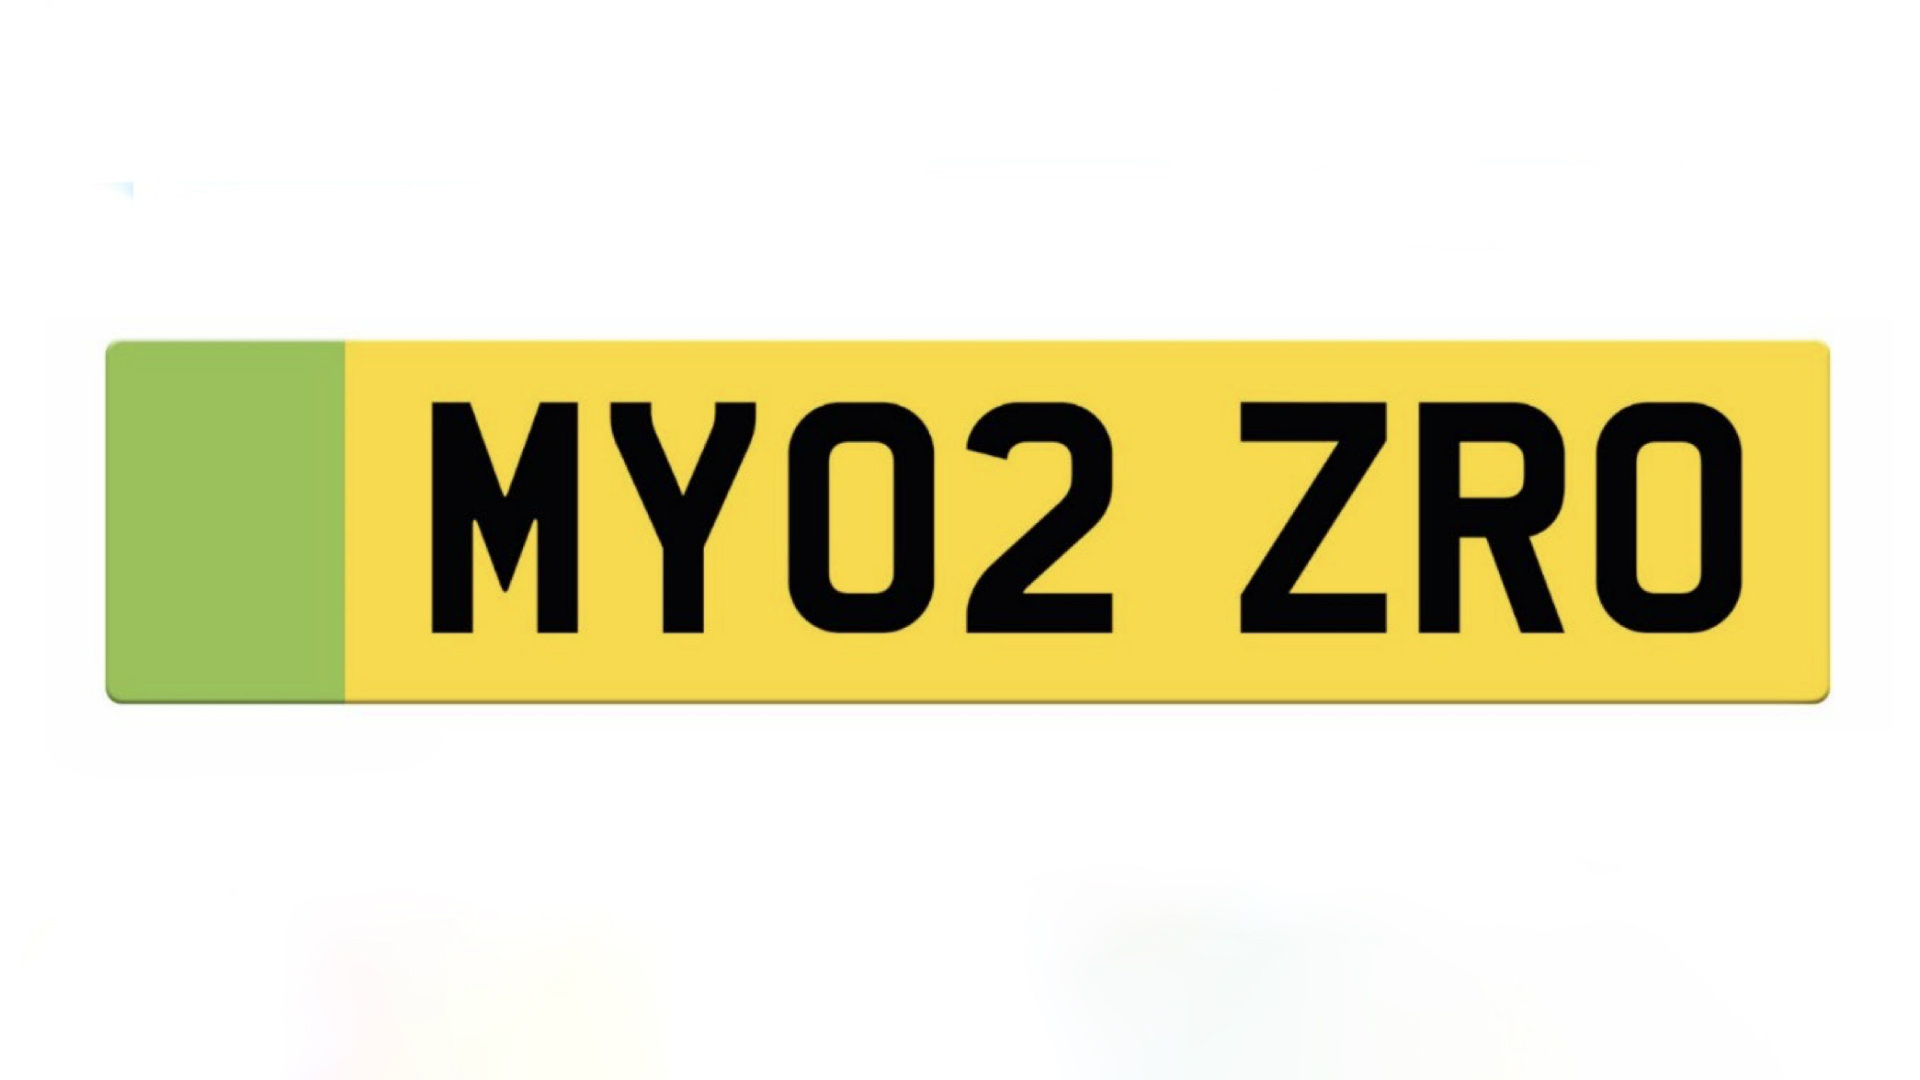 Green number plates opinion